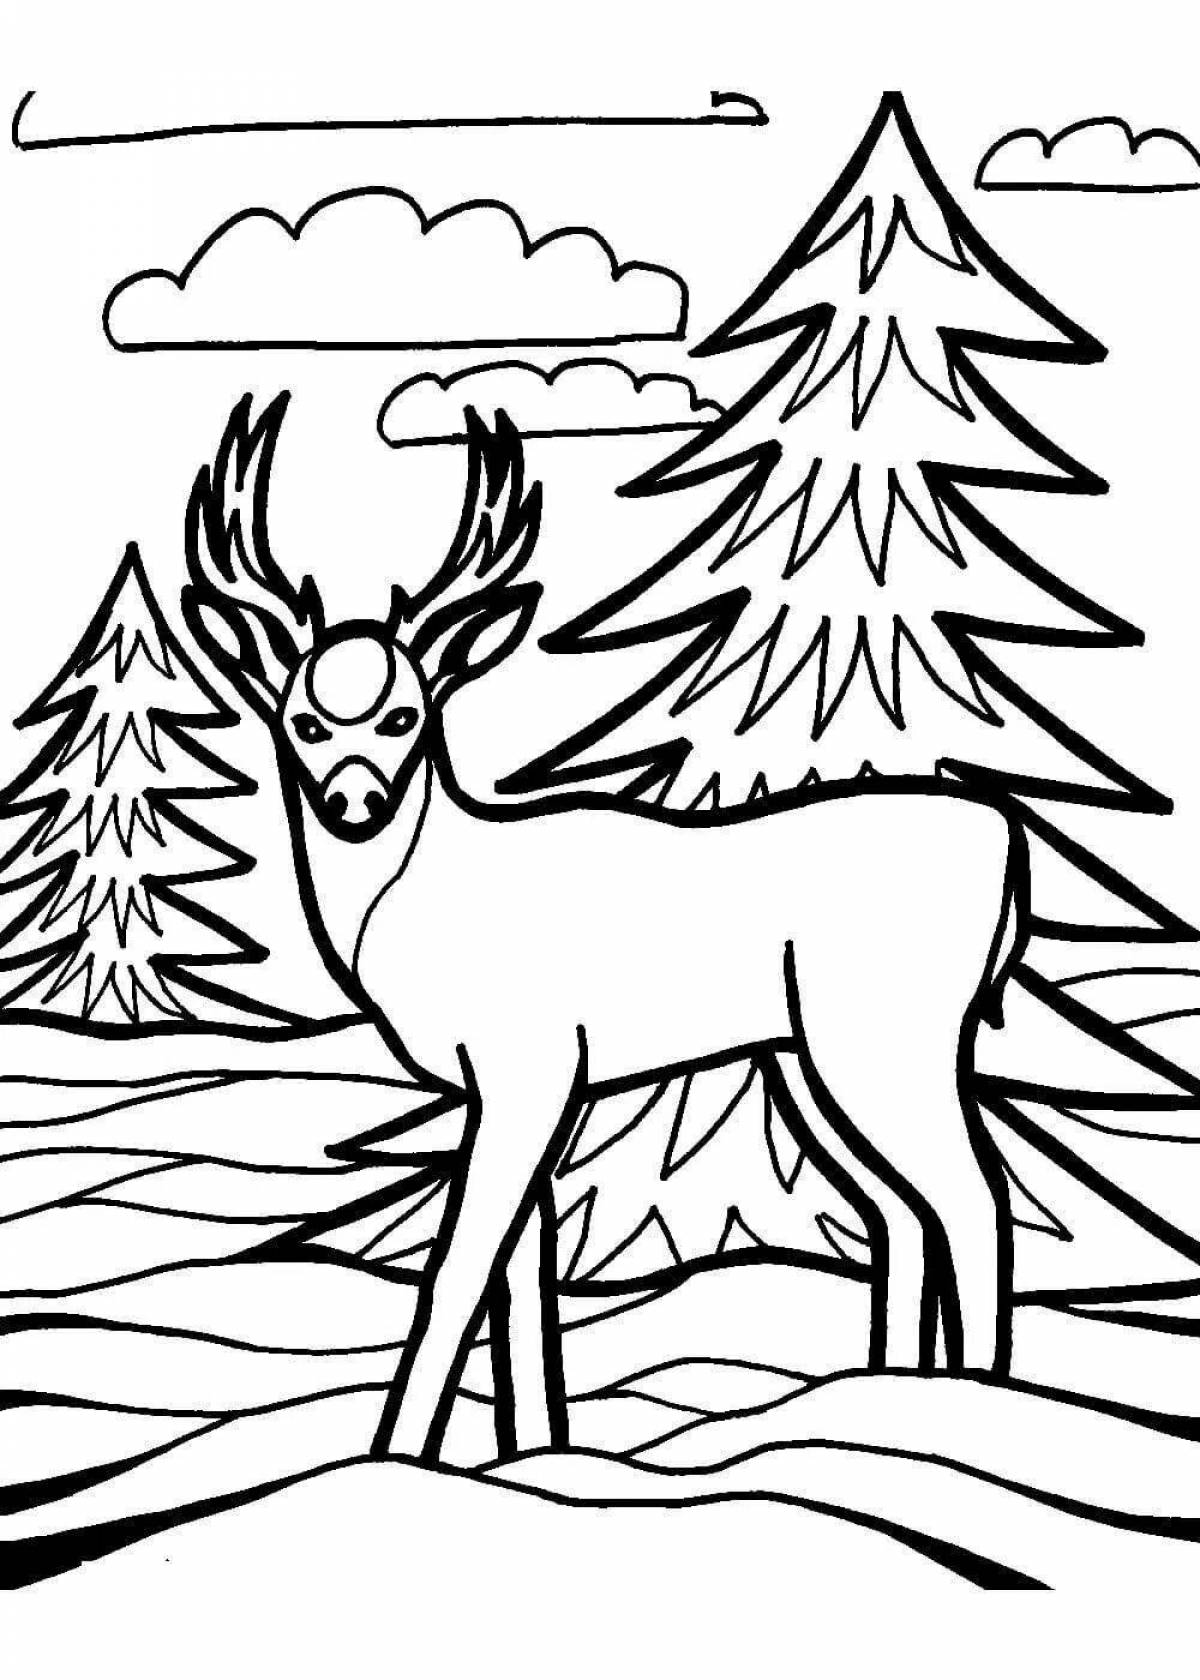 Majestic animal coloring pages in the winter forest